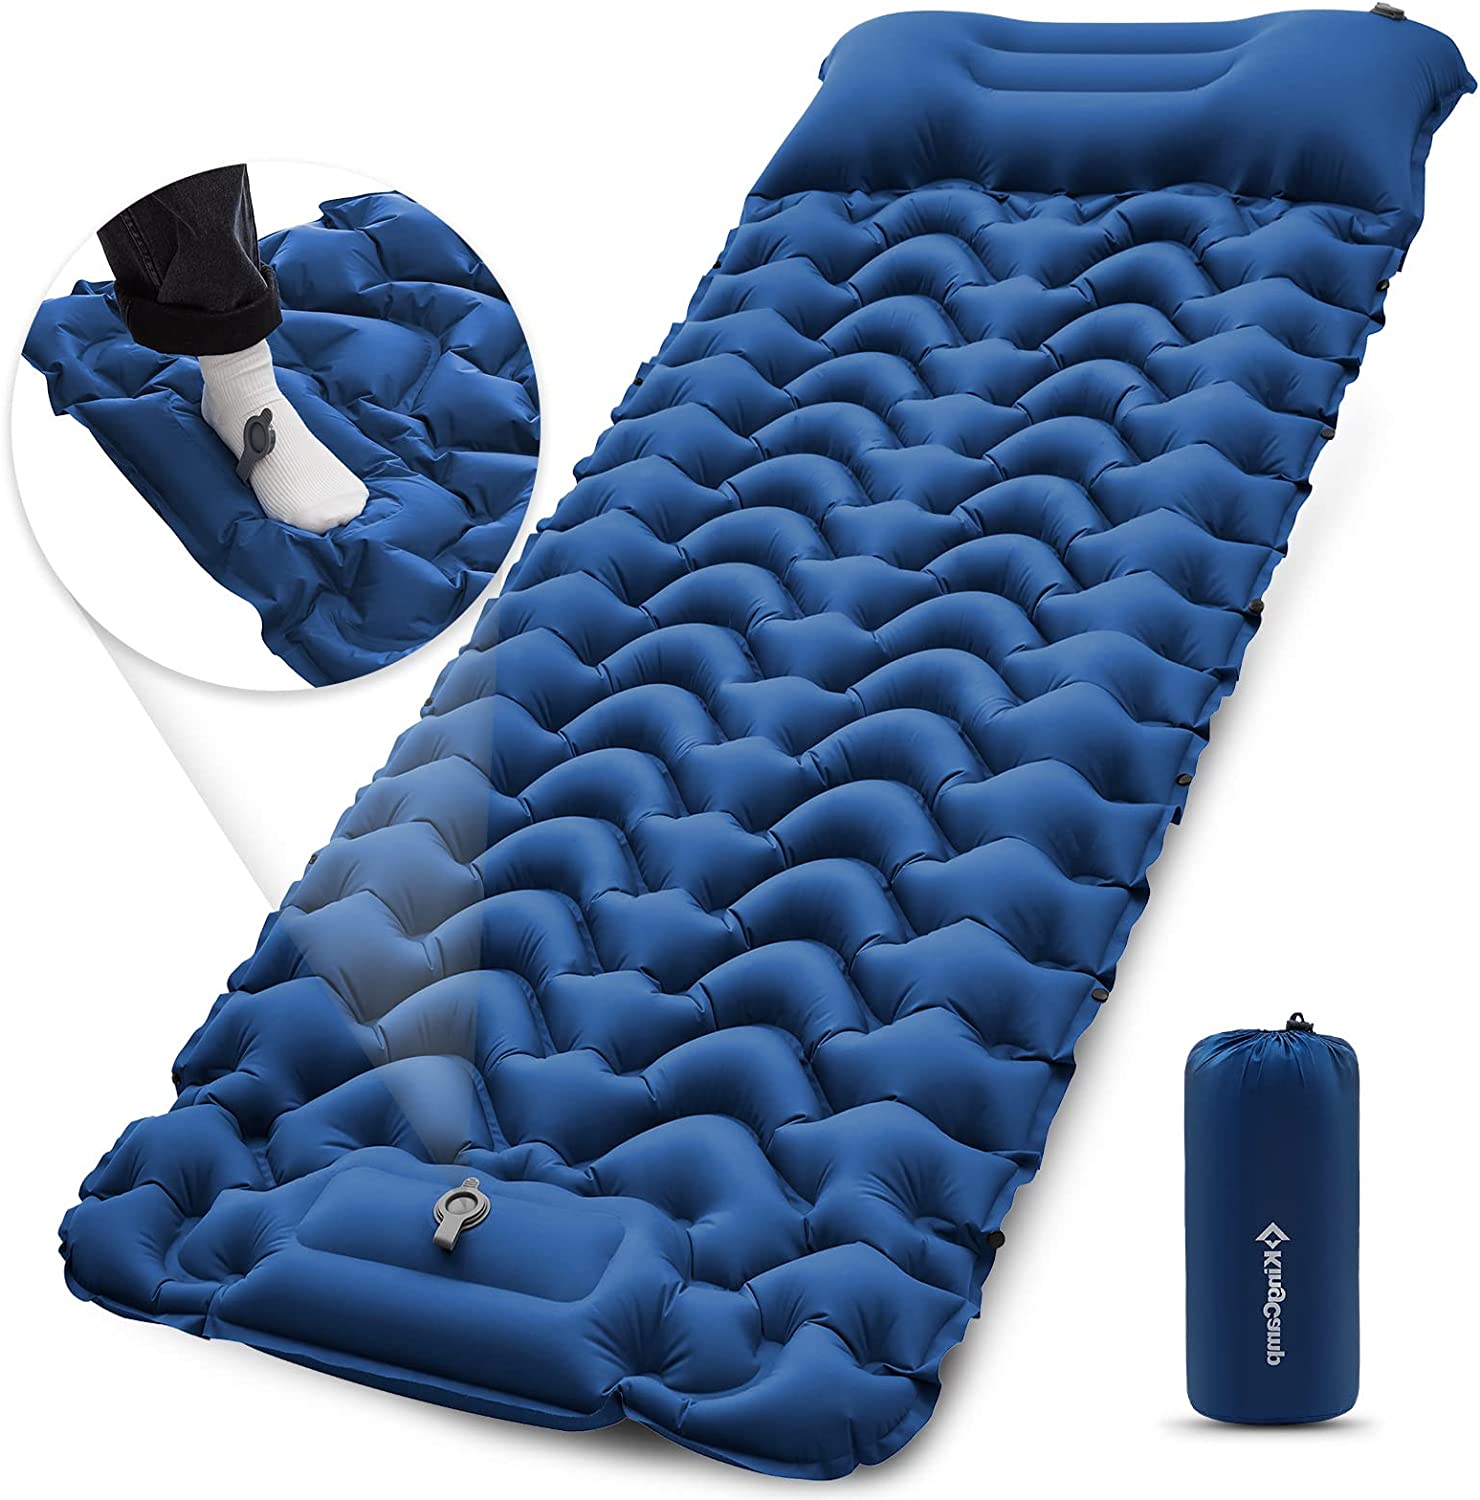 KingCamp Ultralight Self Inflating Sleeping Pad with Built-in Foot